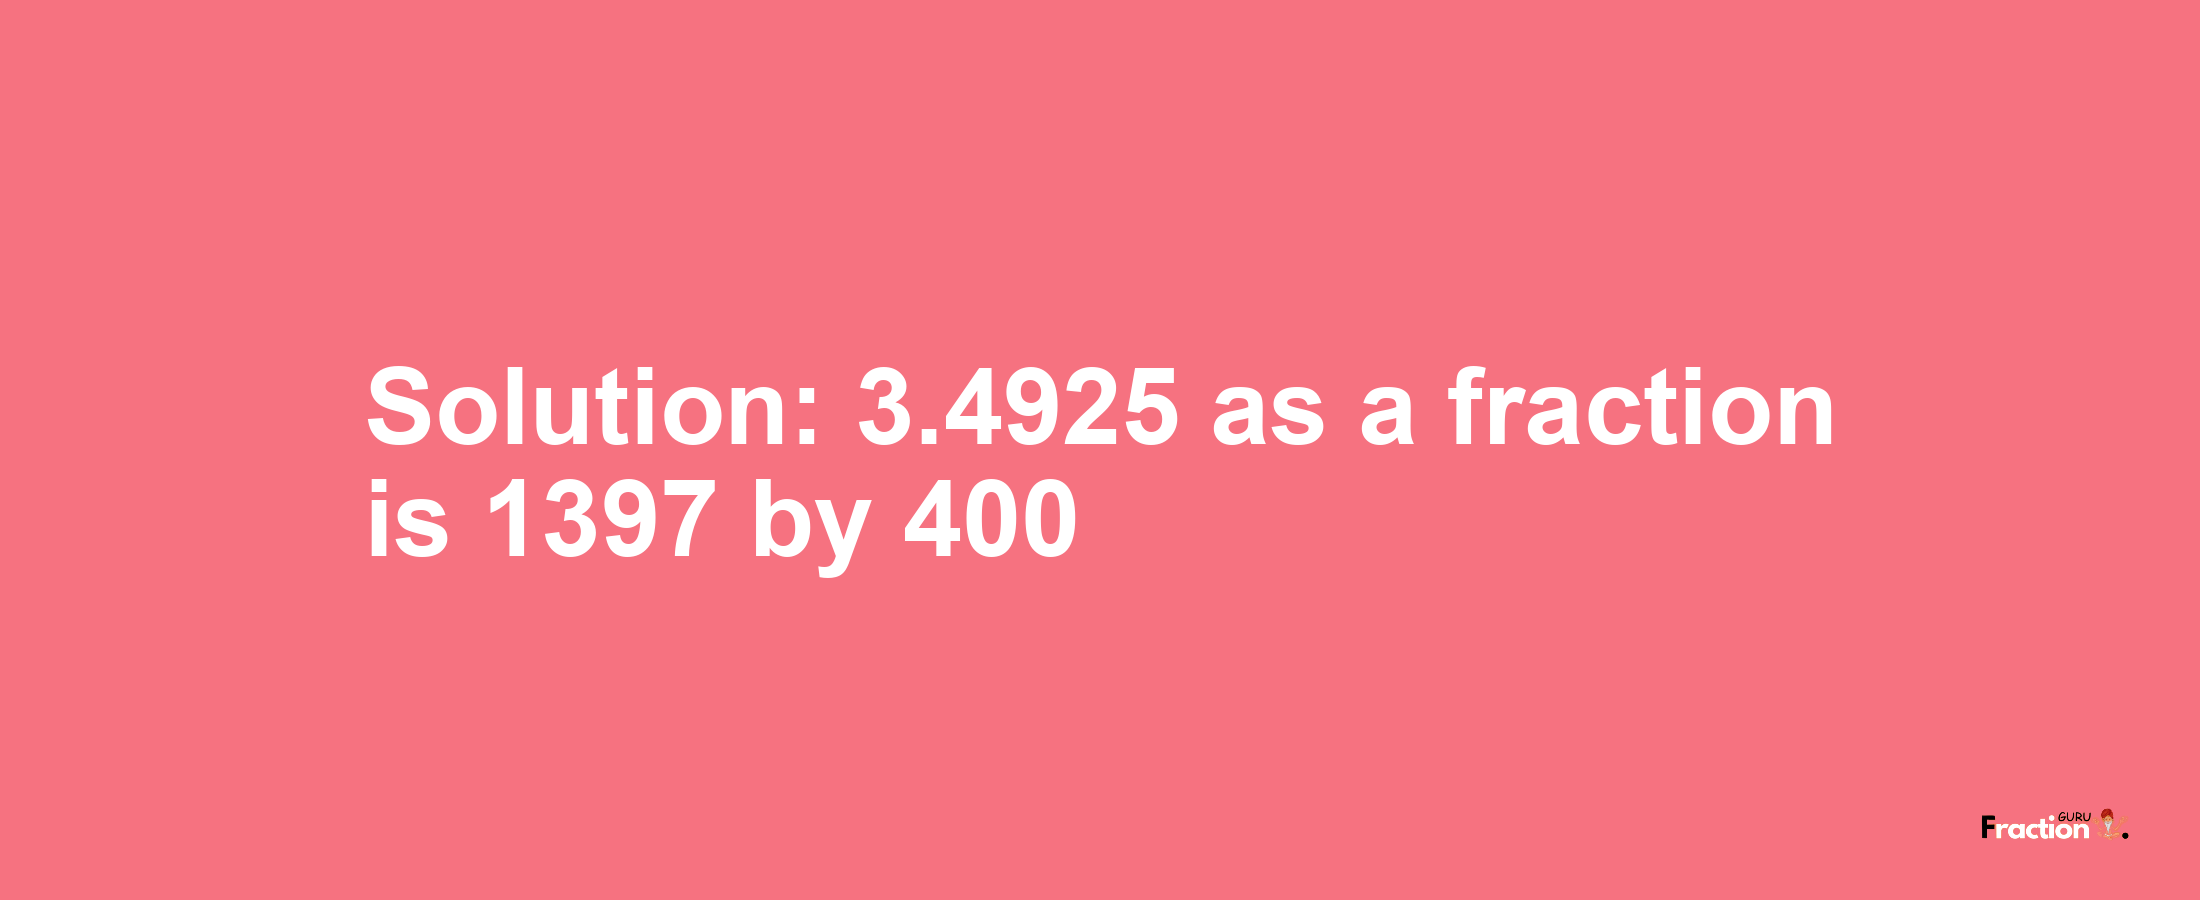 Solution:3.4925 as a fraction is 1397/400